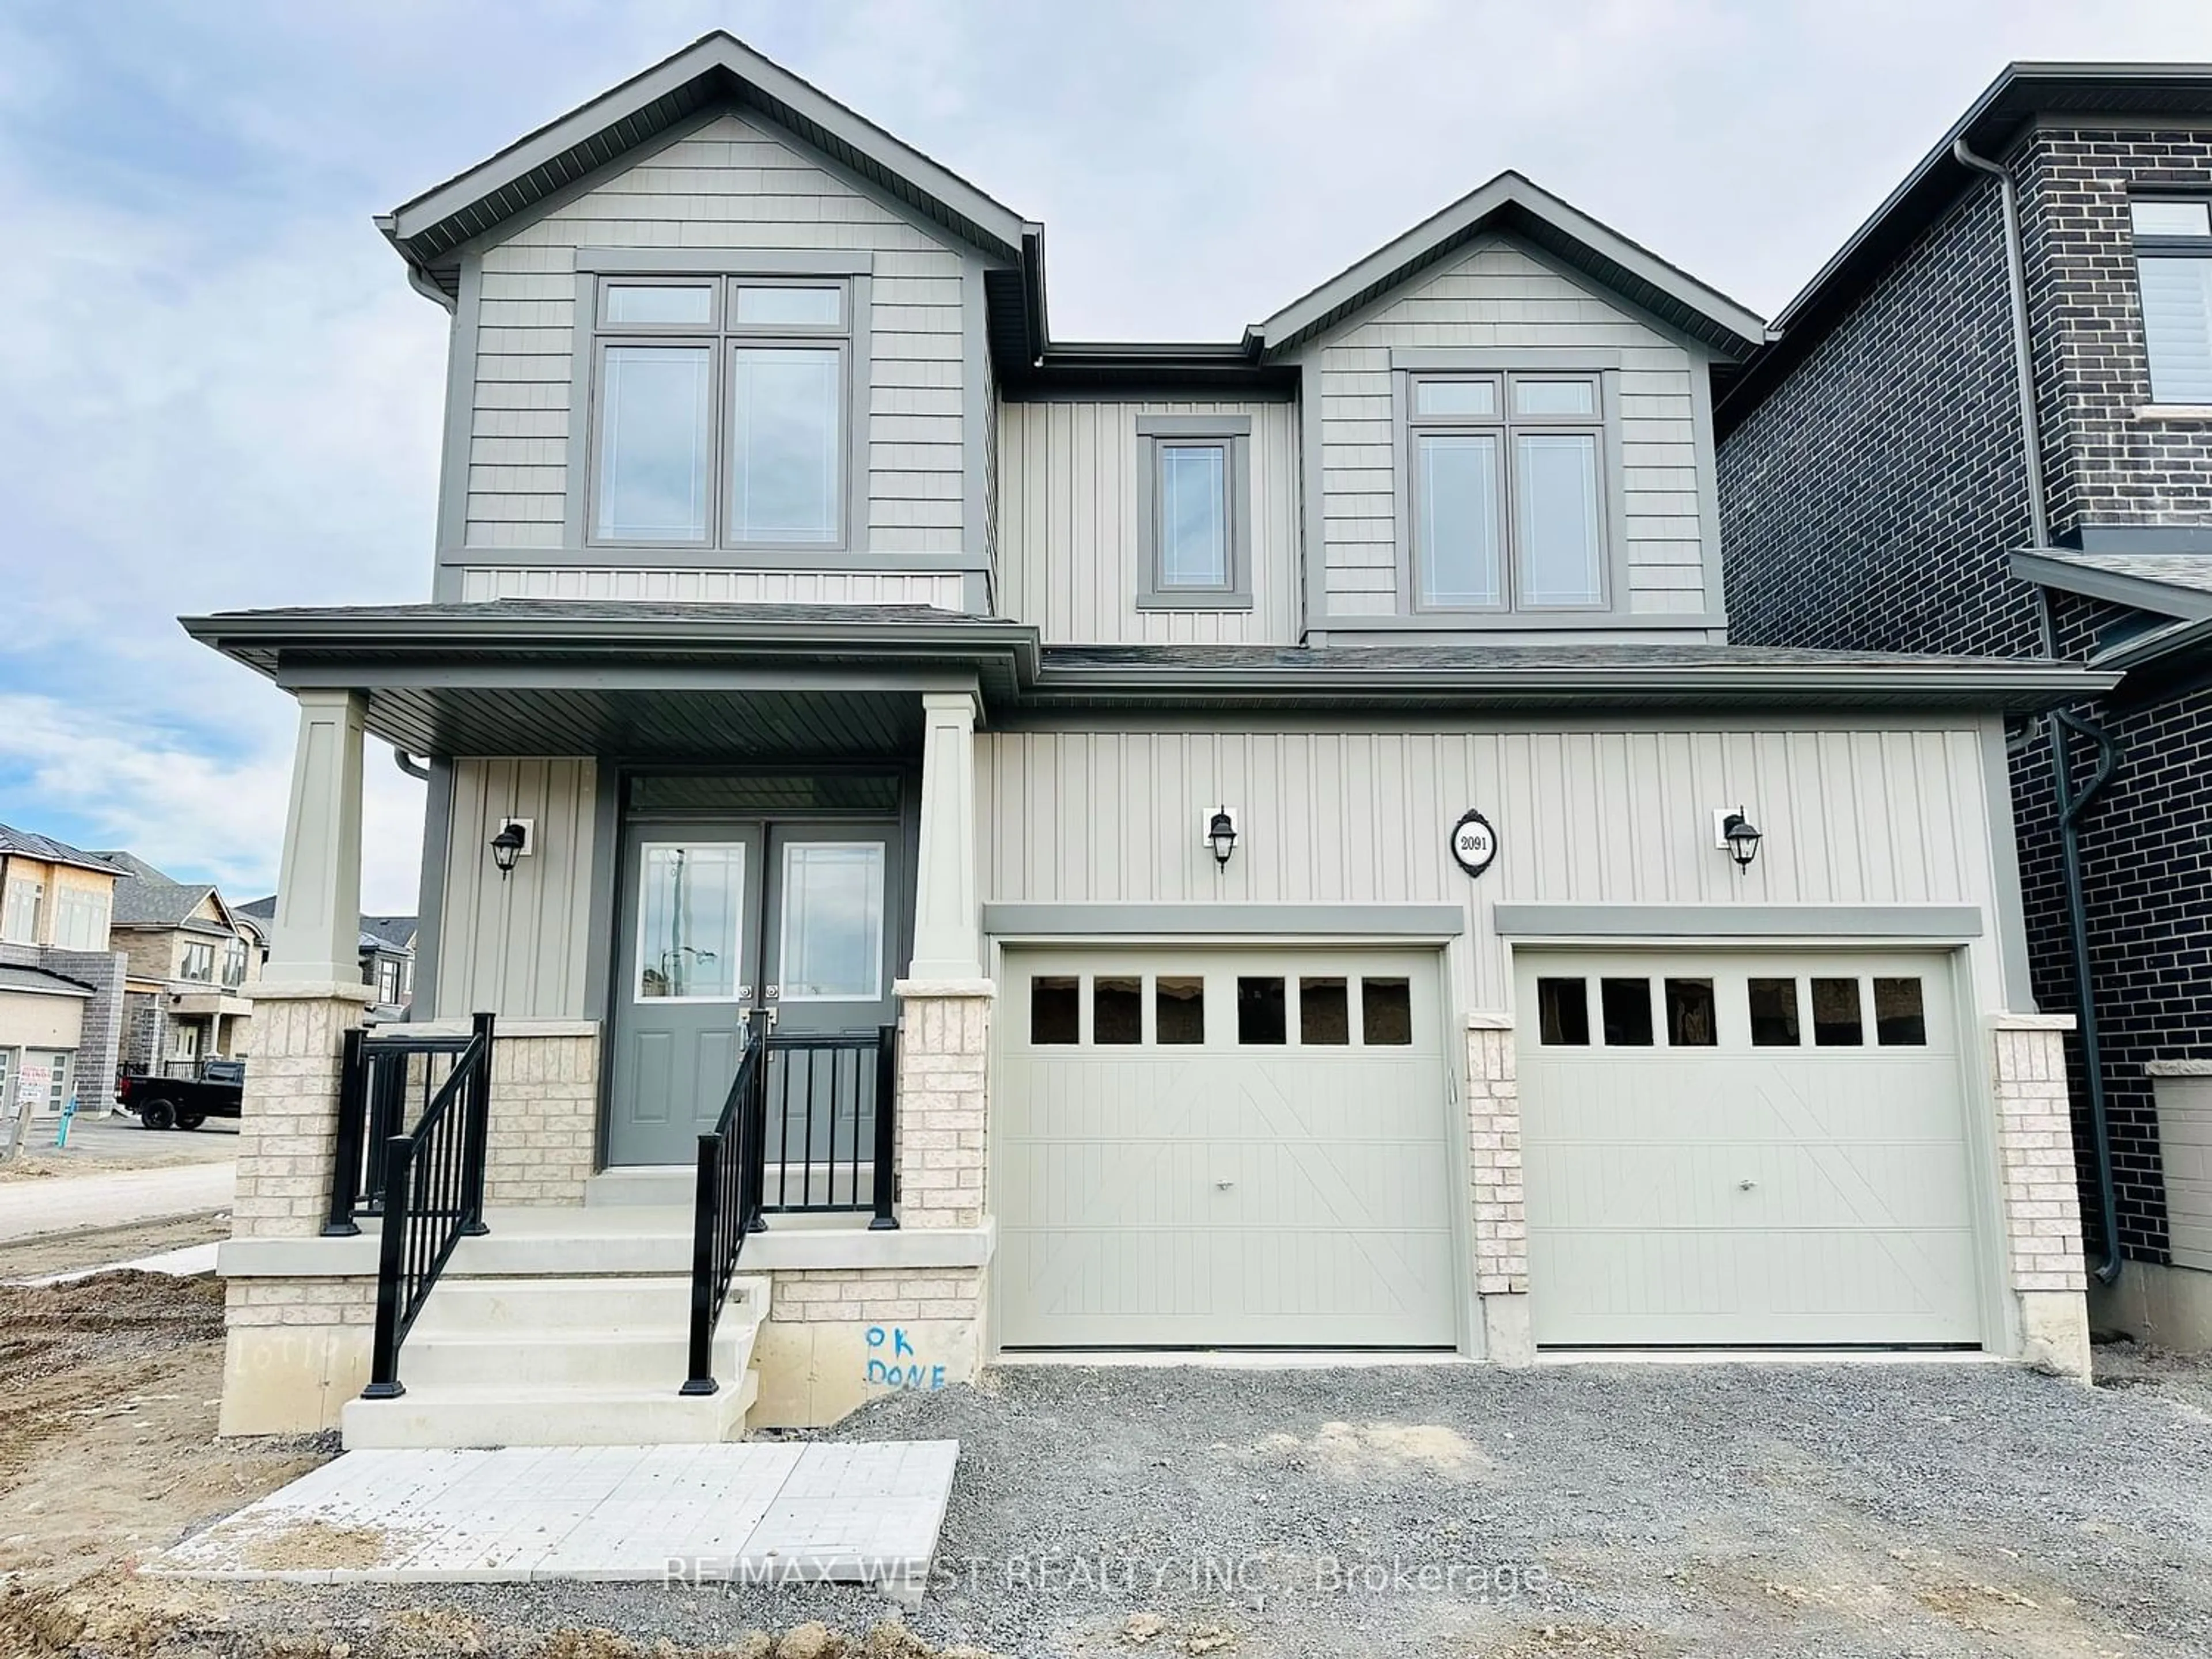 Home with stone exterior material for 2091 Hallandale St, Oshawa Ontario L1H 8L7